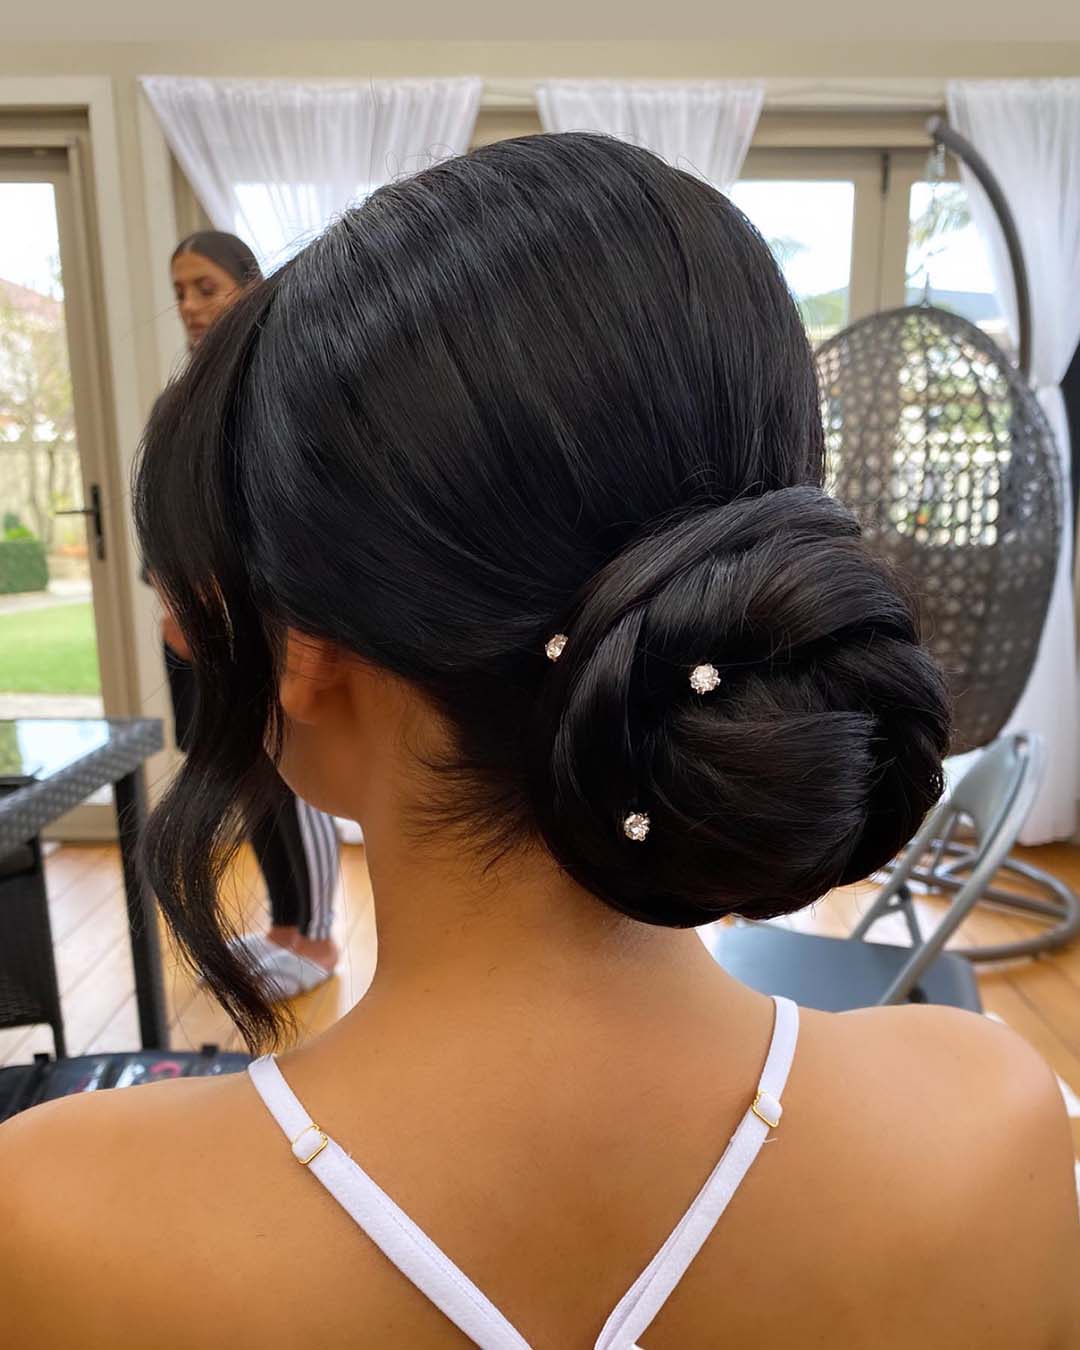  2020 Superb Black Wedding Hairstyles  50 Stunning Bridal Hairstyles  for Black and African Women  YouTube